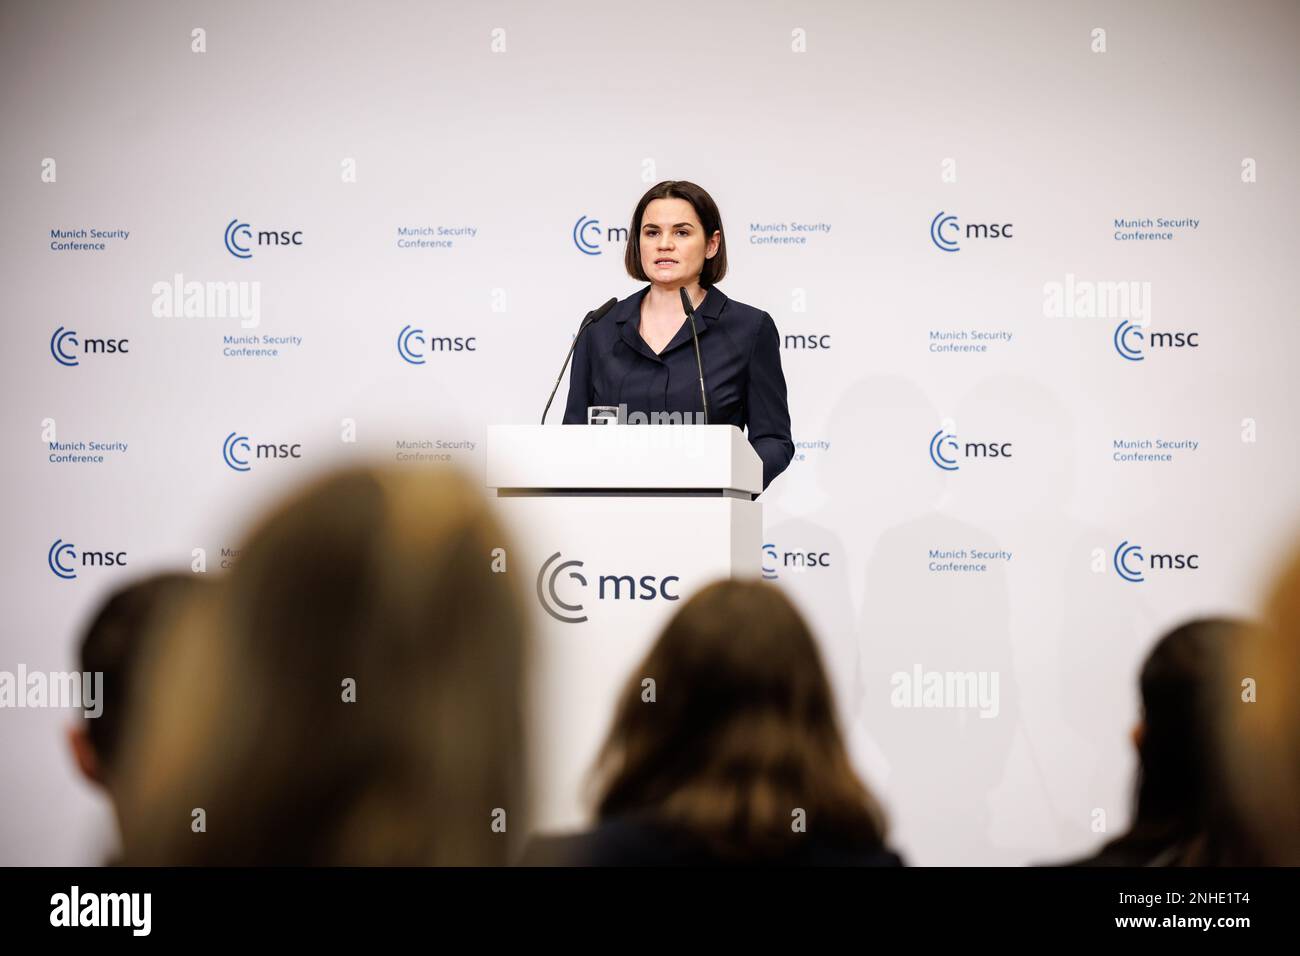 Munich, Germany. 18 February, 2023. Belarus opposition leader Sviatlana Tsikhanouskaya holds a press conference during the Munich Security Conference at the Bayerischer Hof Hotel February 18, 2023 in Munich, Germany.  Credit: Matthias Balk/MSC/Matthias Balk/MSC/Alamy Live News Stock Photo